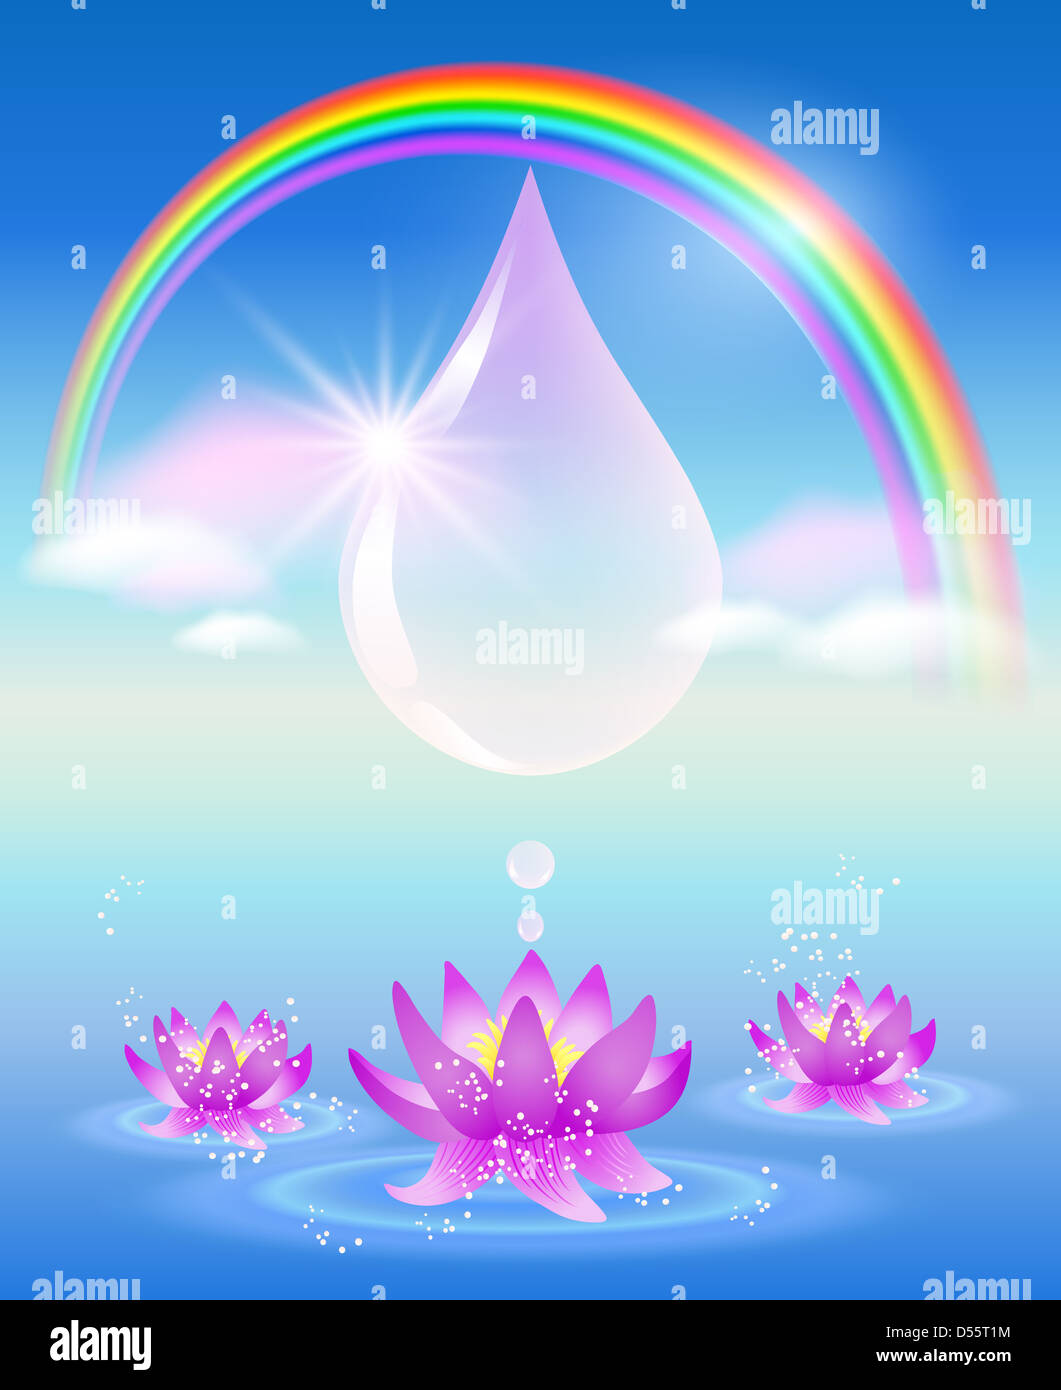 Rainbow, water drop, clouds and lilies. Symbol of clean water. Stock Photo